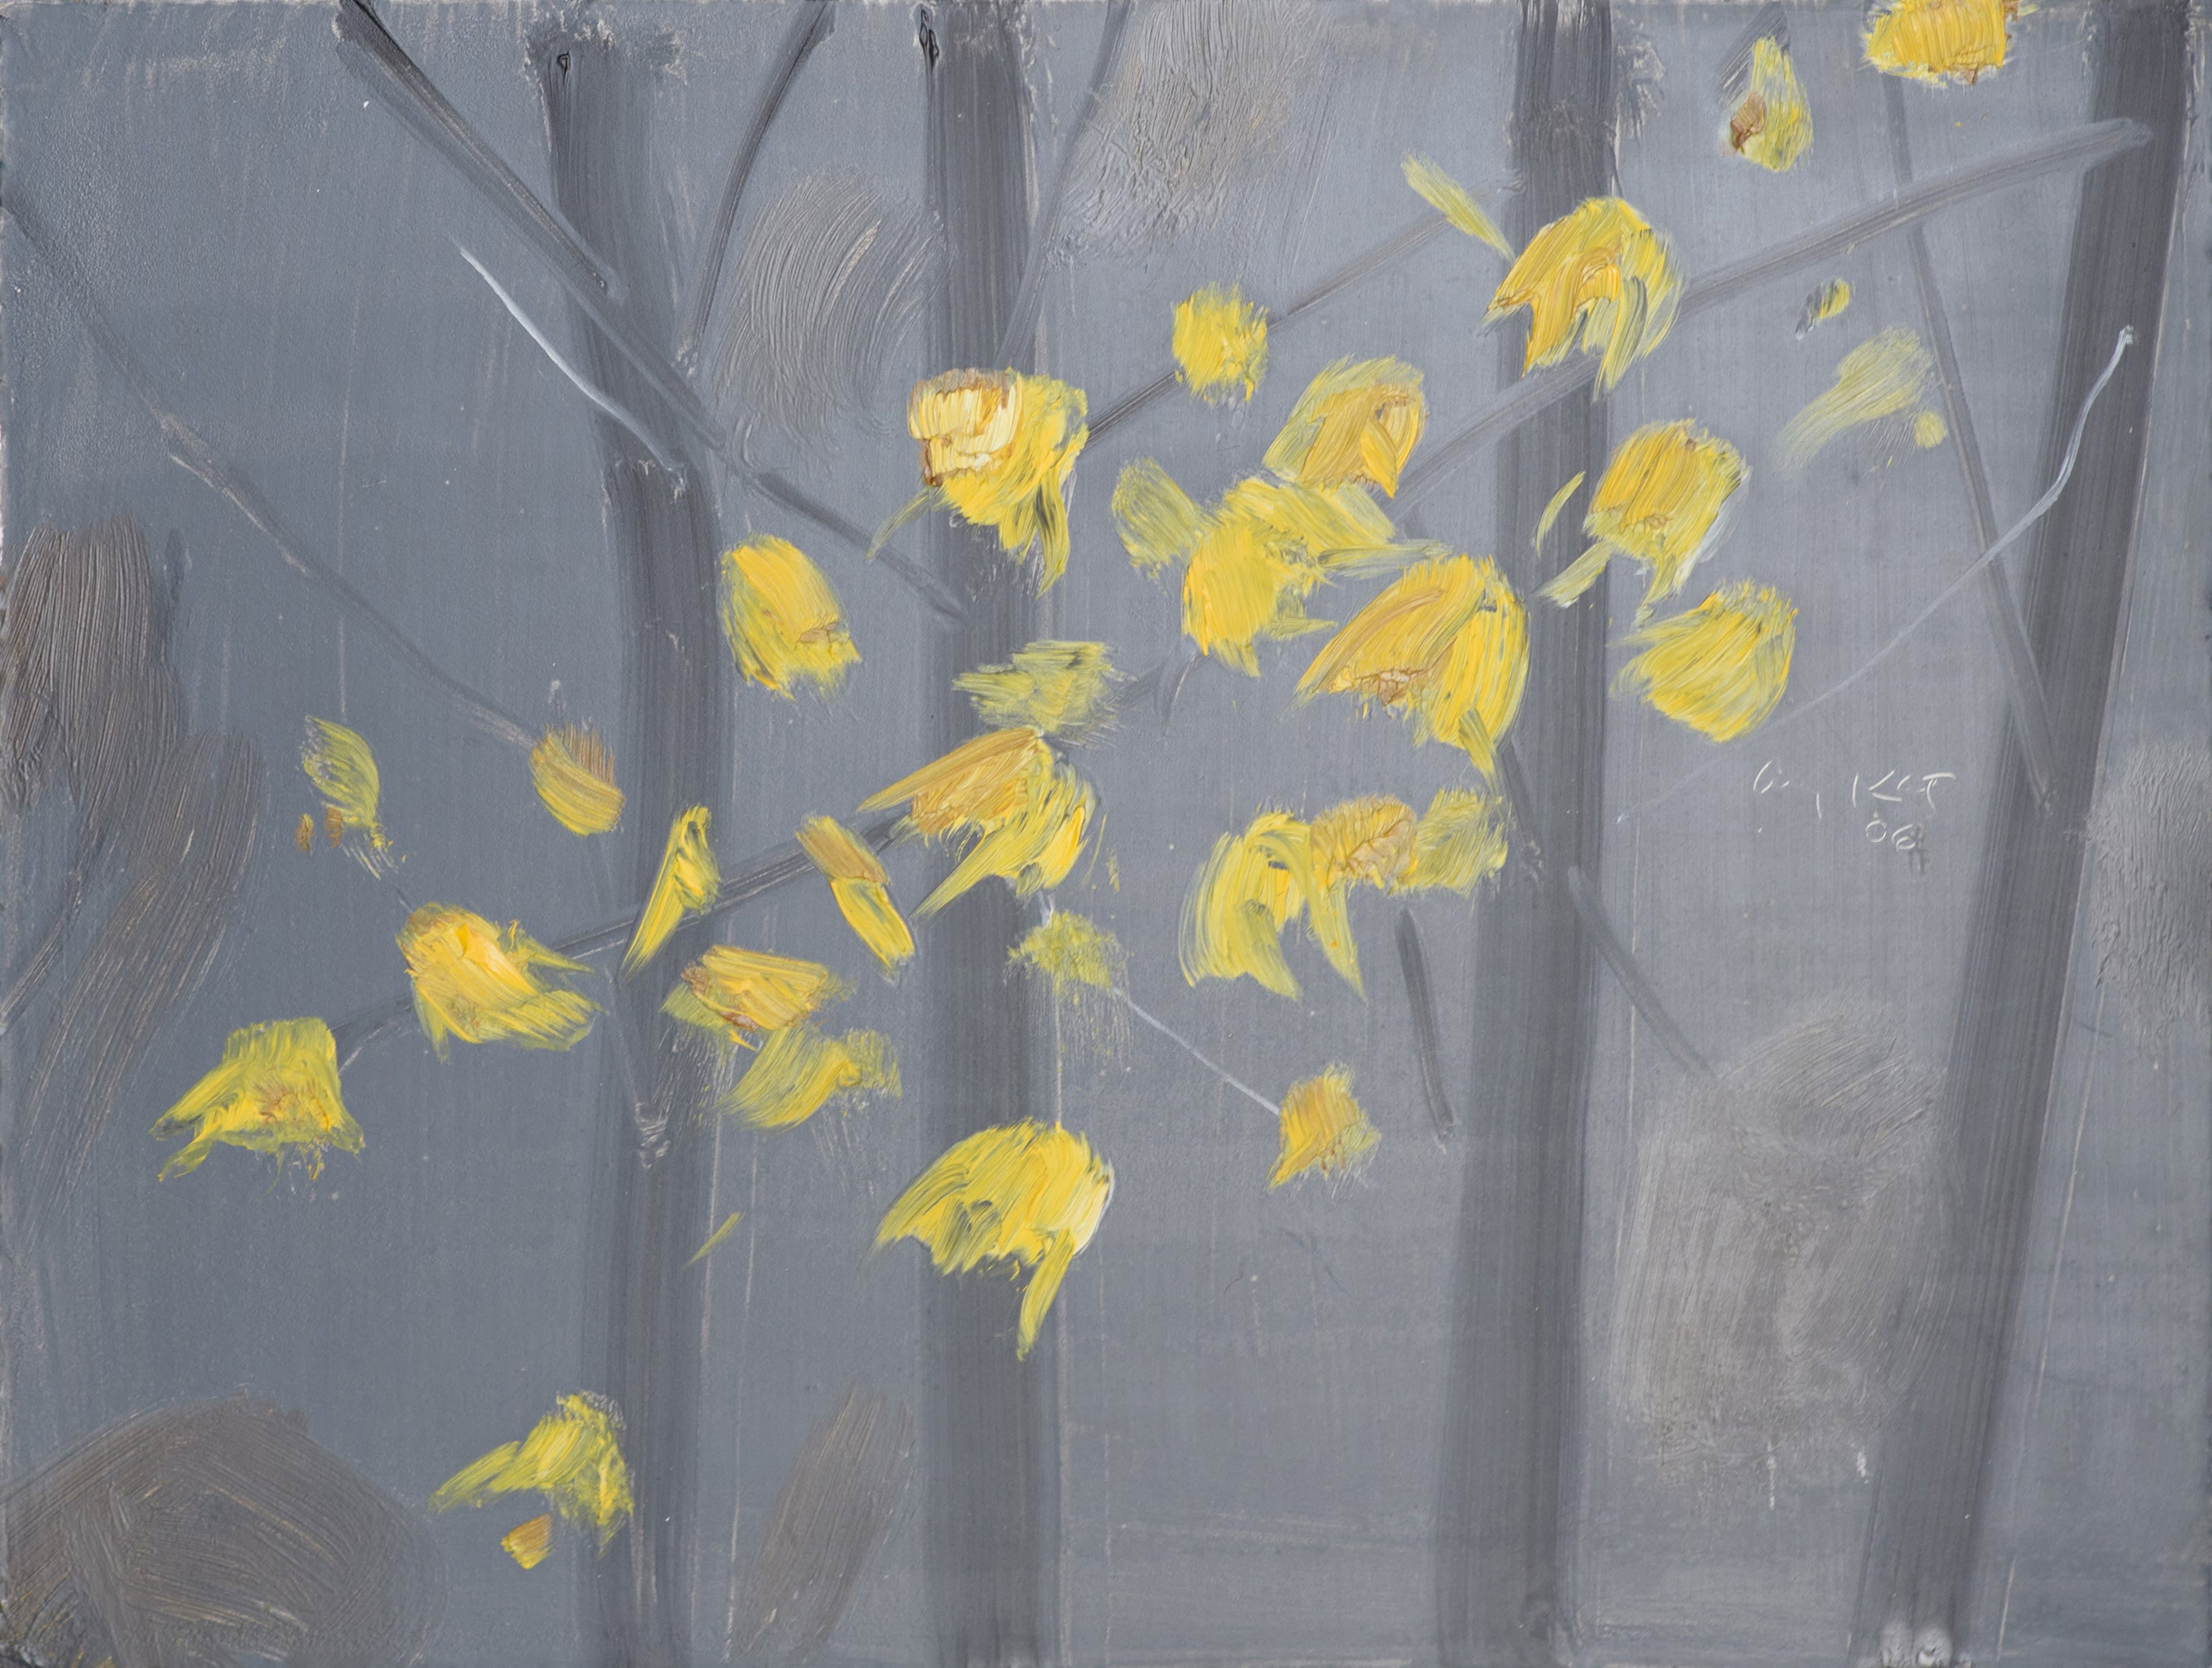 Yellow Leaves #5, 2006, Oil on board, 9 x 12 inches (22.9 x 30.5 cm)